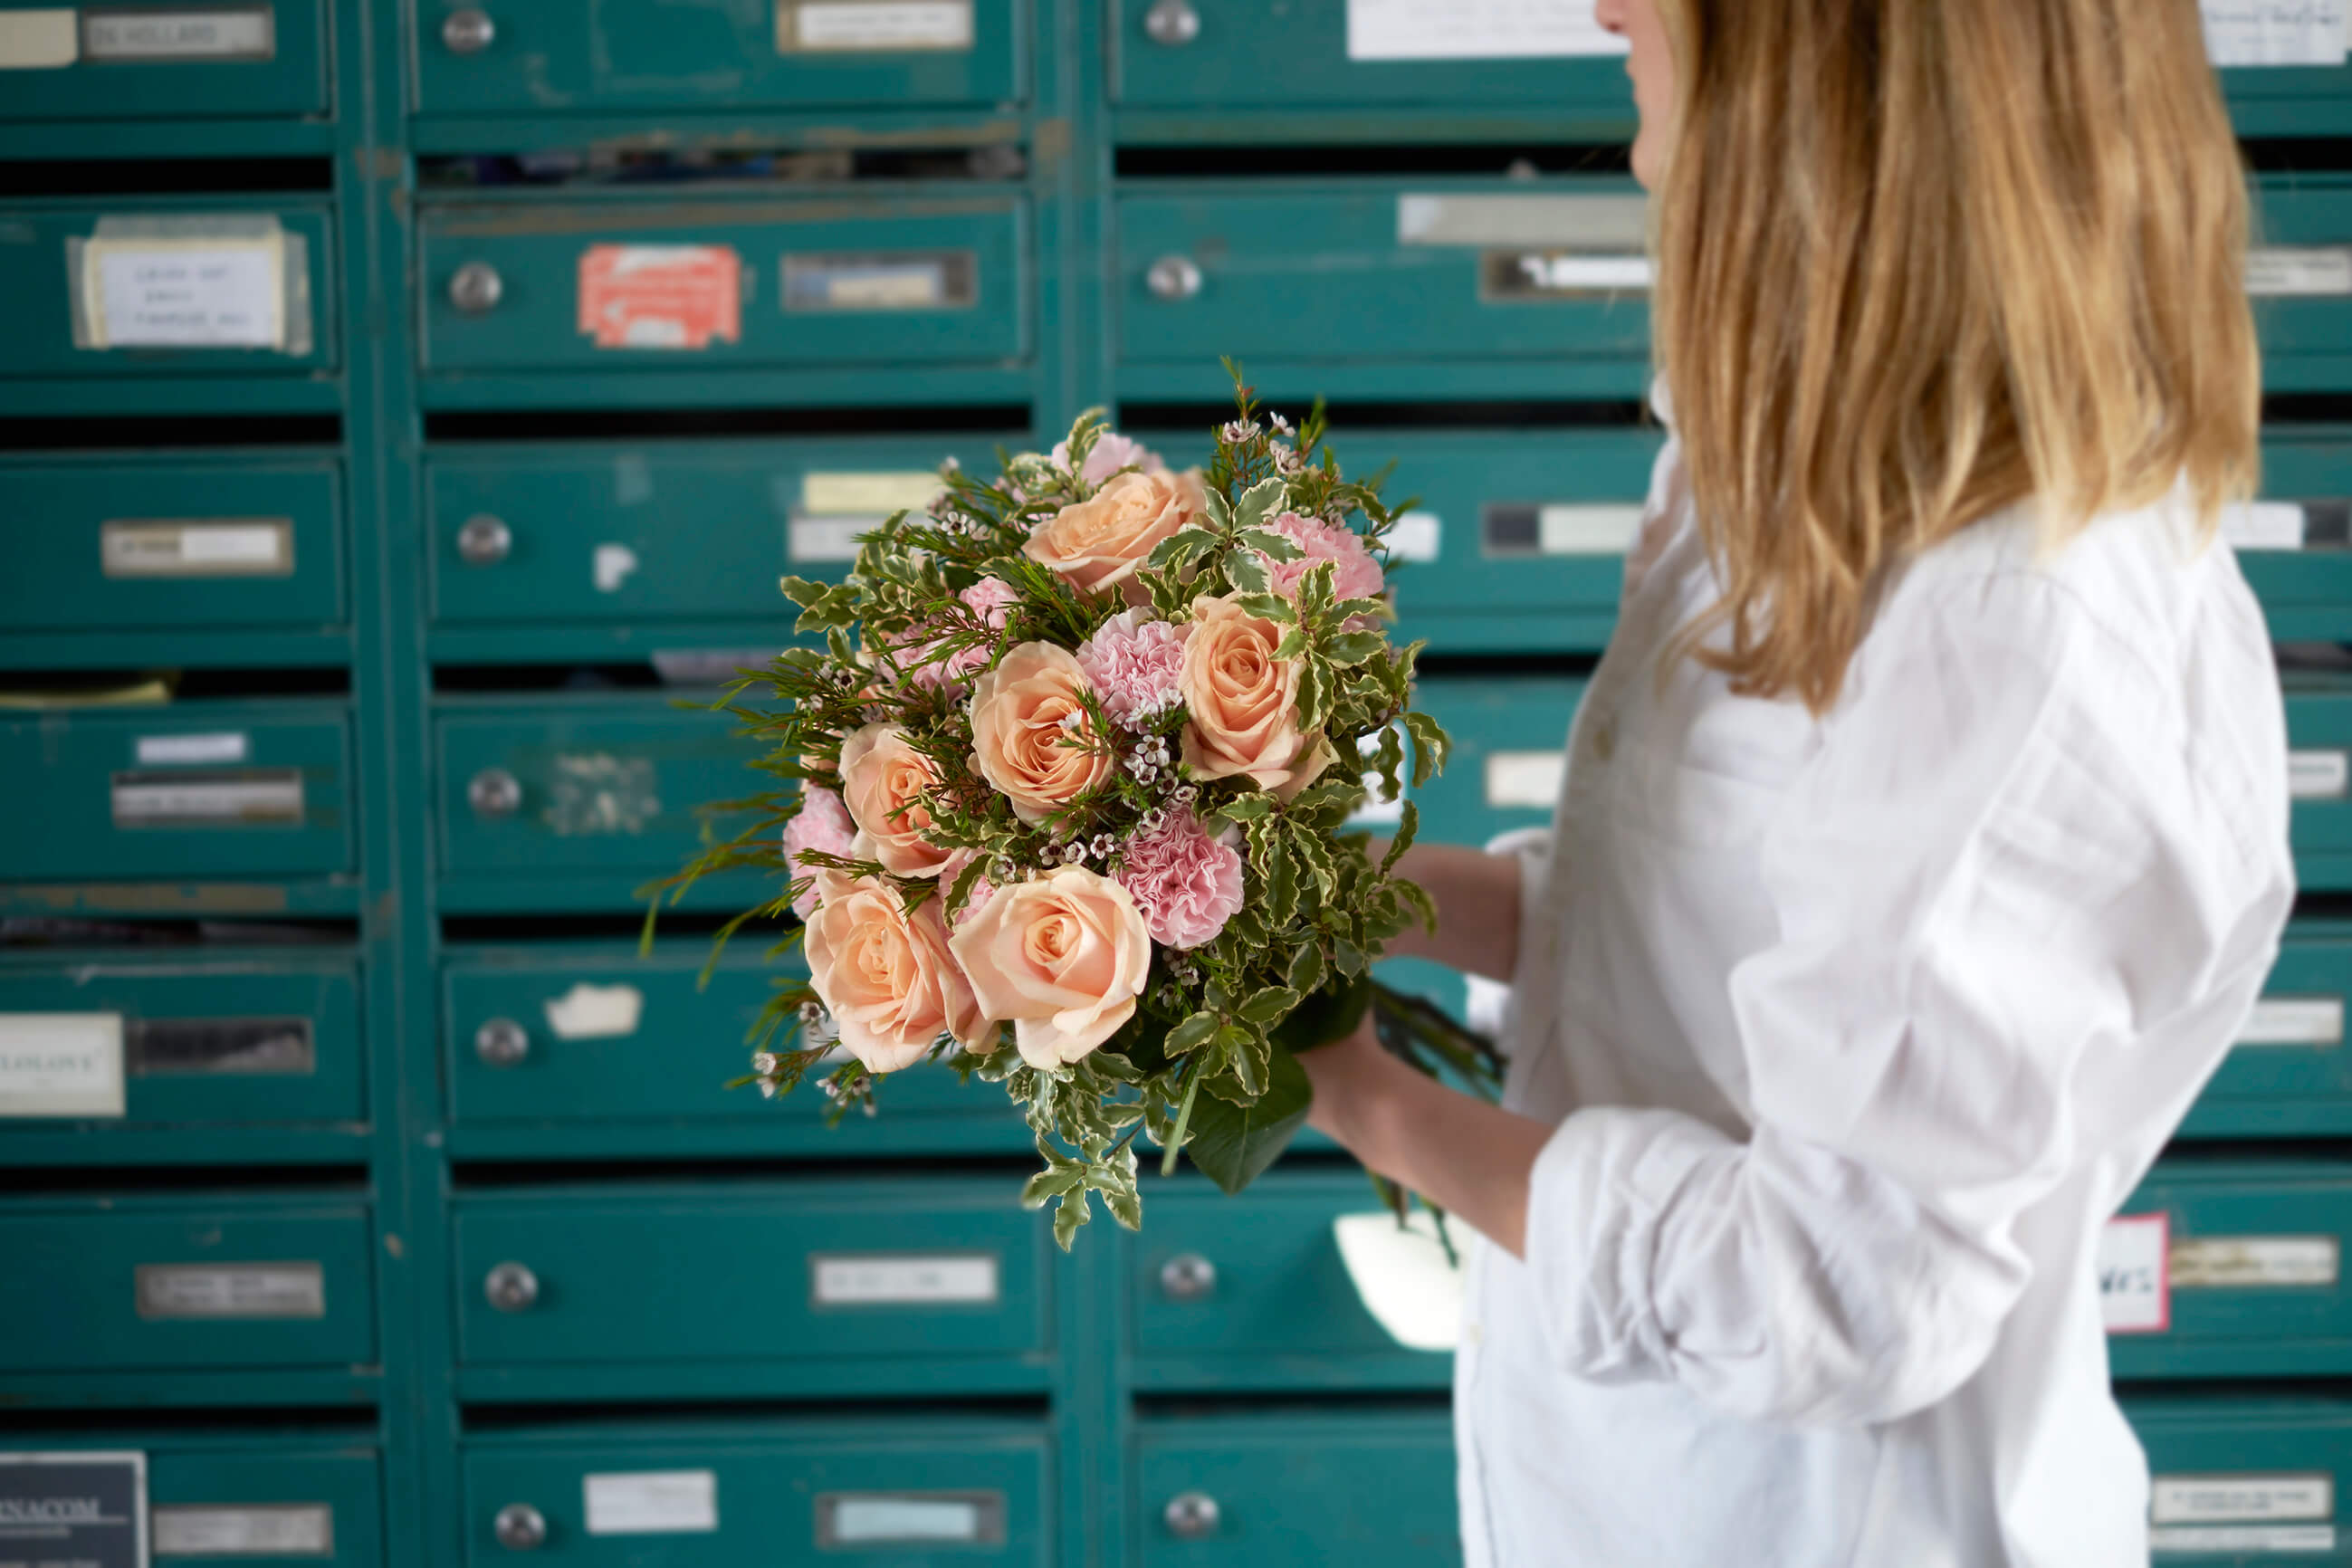 Best Florists & Flower Delivery in Lake Worth, FL